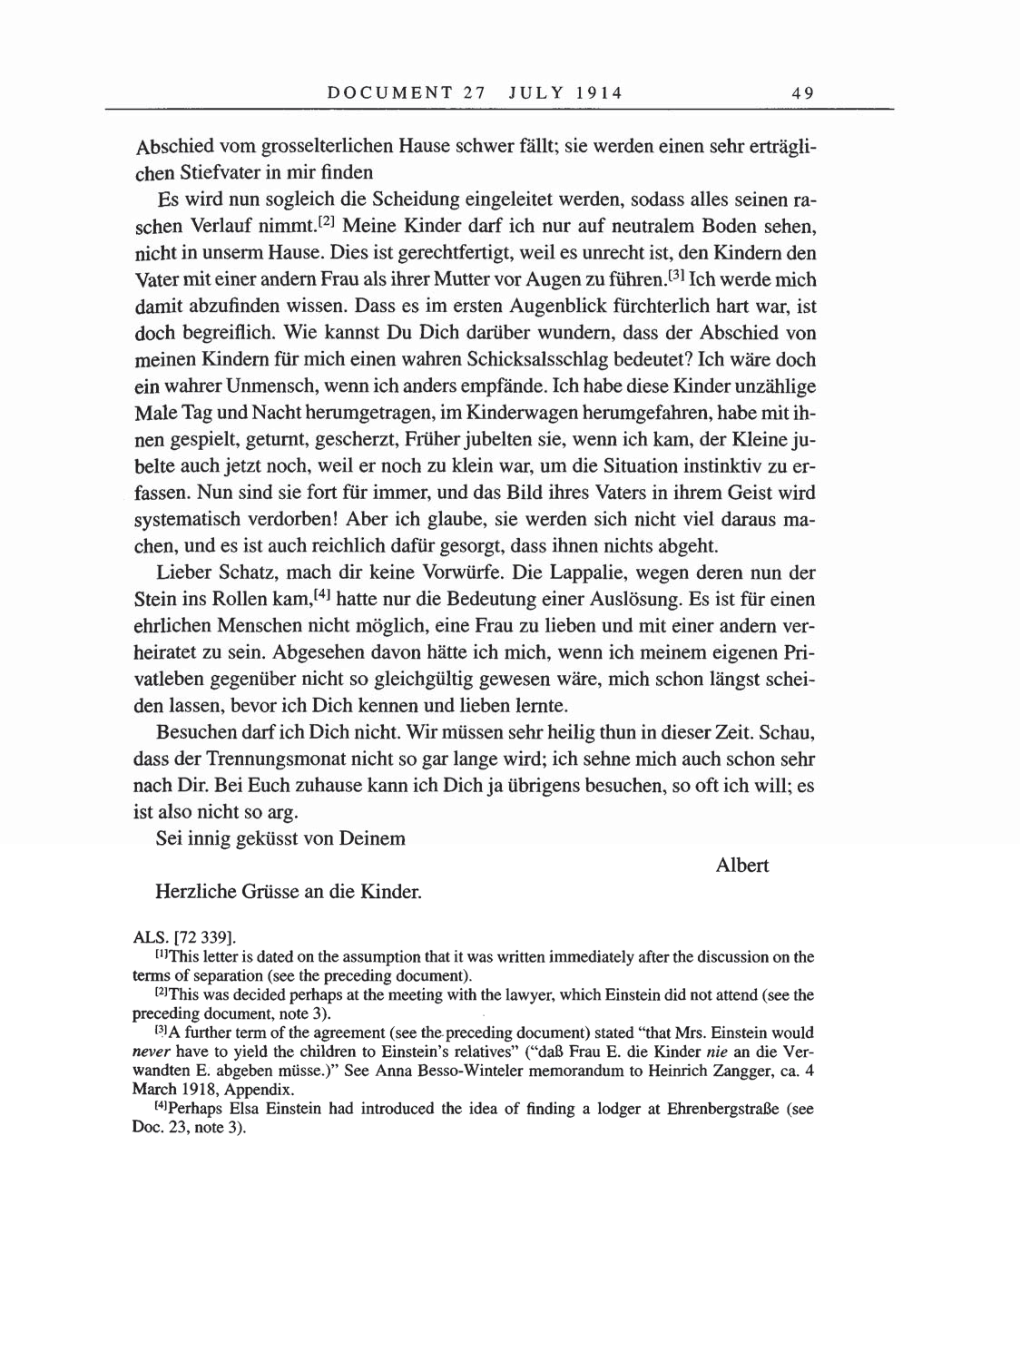 Volume 8, Part A: The Berlin Years: Correspondence 1914-1917 page 49